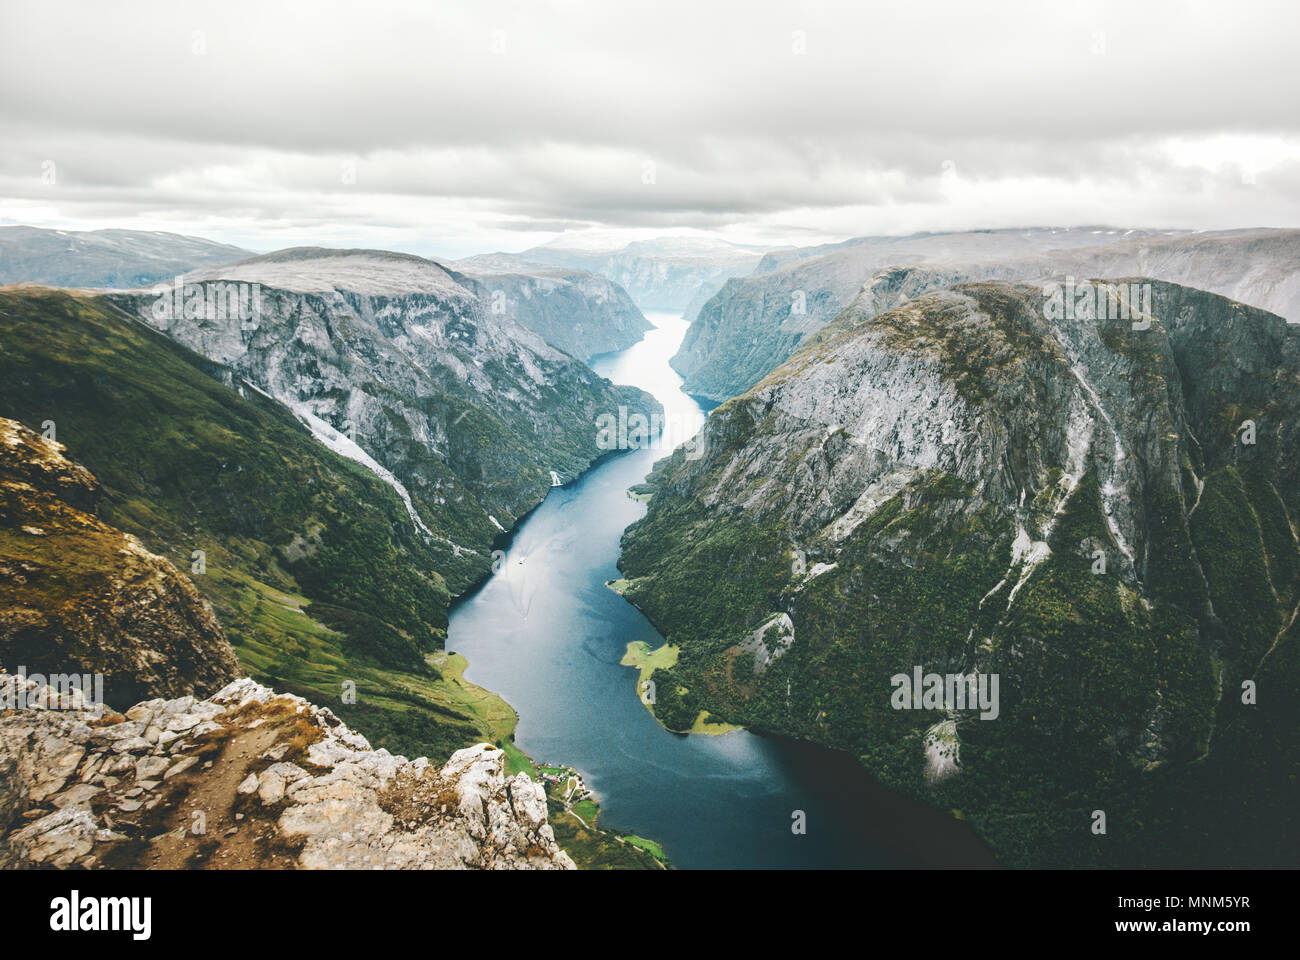 Norway Landscape fjord and mountains aerial view Naeroyfjord beautiful scenery scandinavian natural landmarks Stock Photo